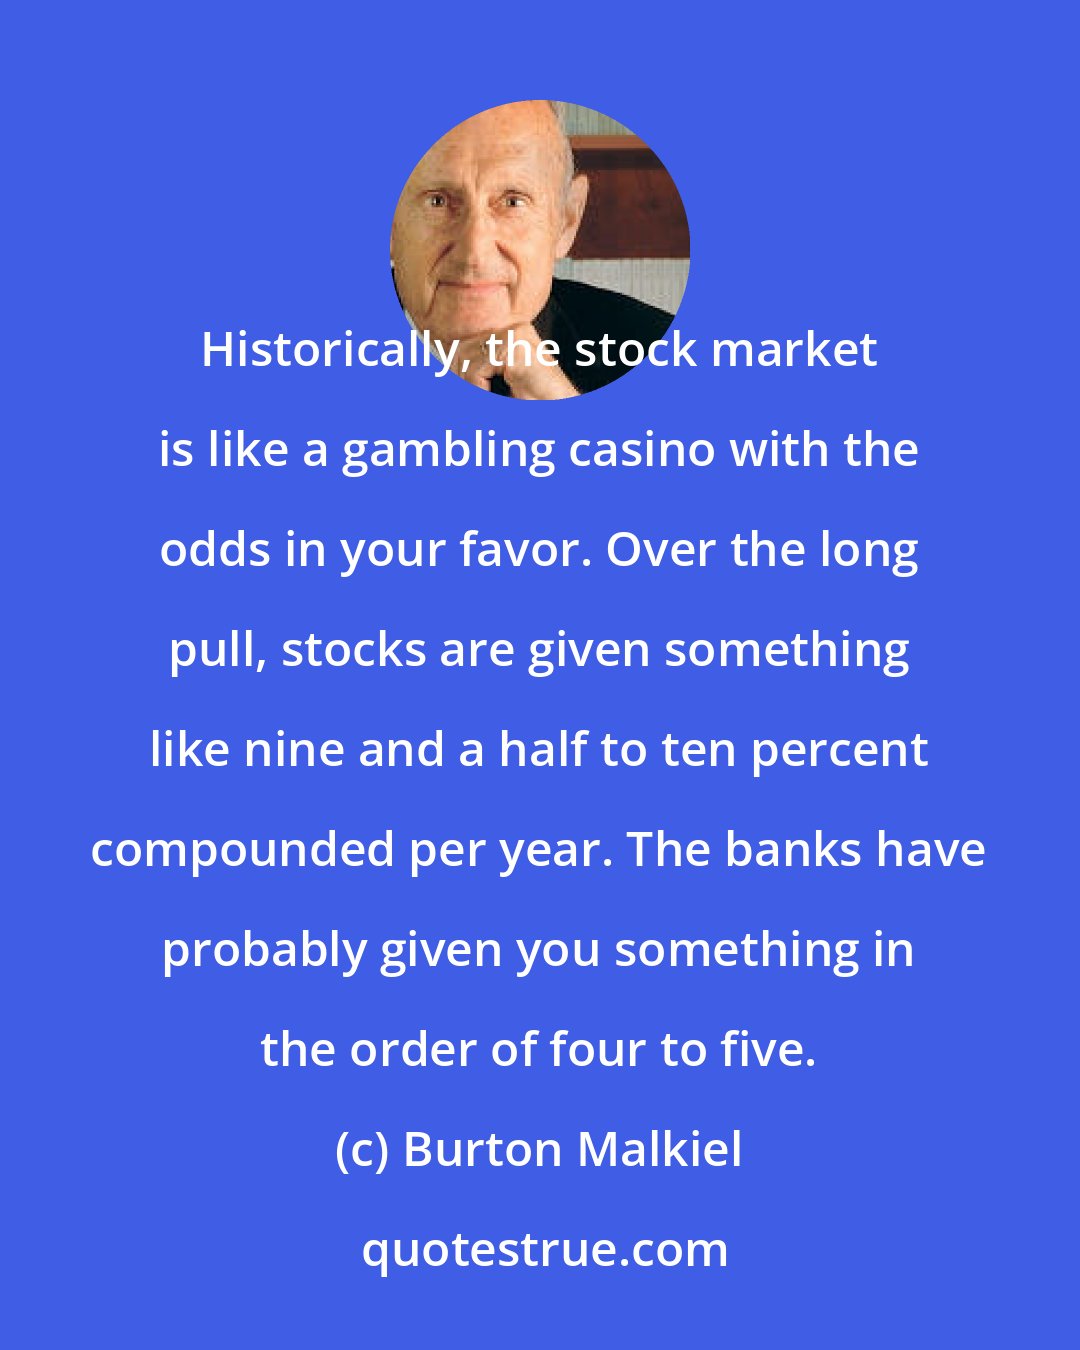 Burton Malkiel: Historically, the stock market is like a gambling casino with the odds in your favor. Over the long pull, stocks are given something like nine and a half to ten percent compounded per year. The banks have probably given you something in the order of four to five.